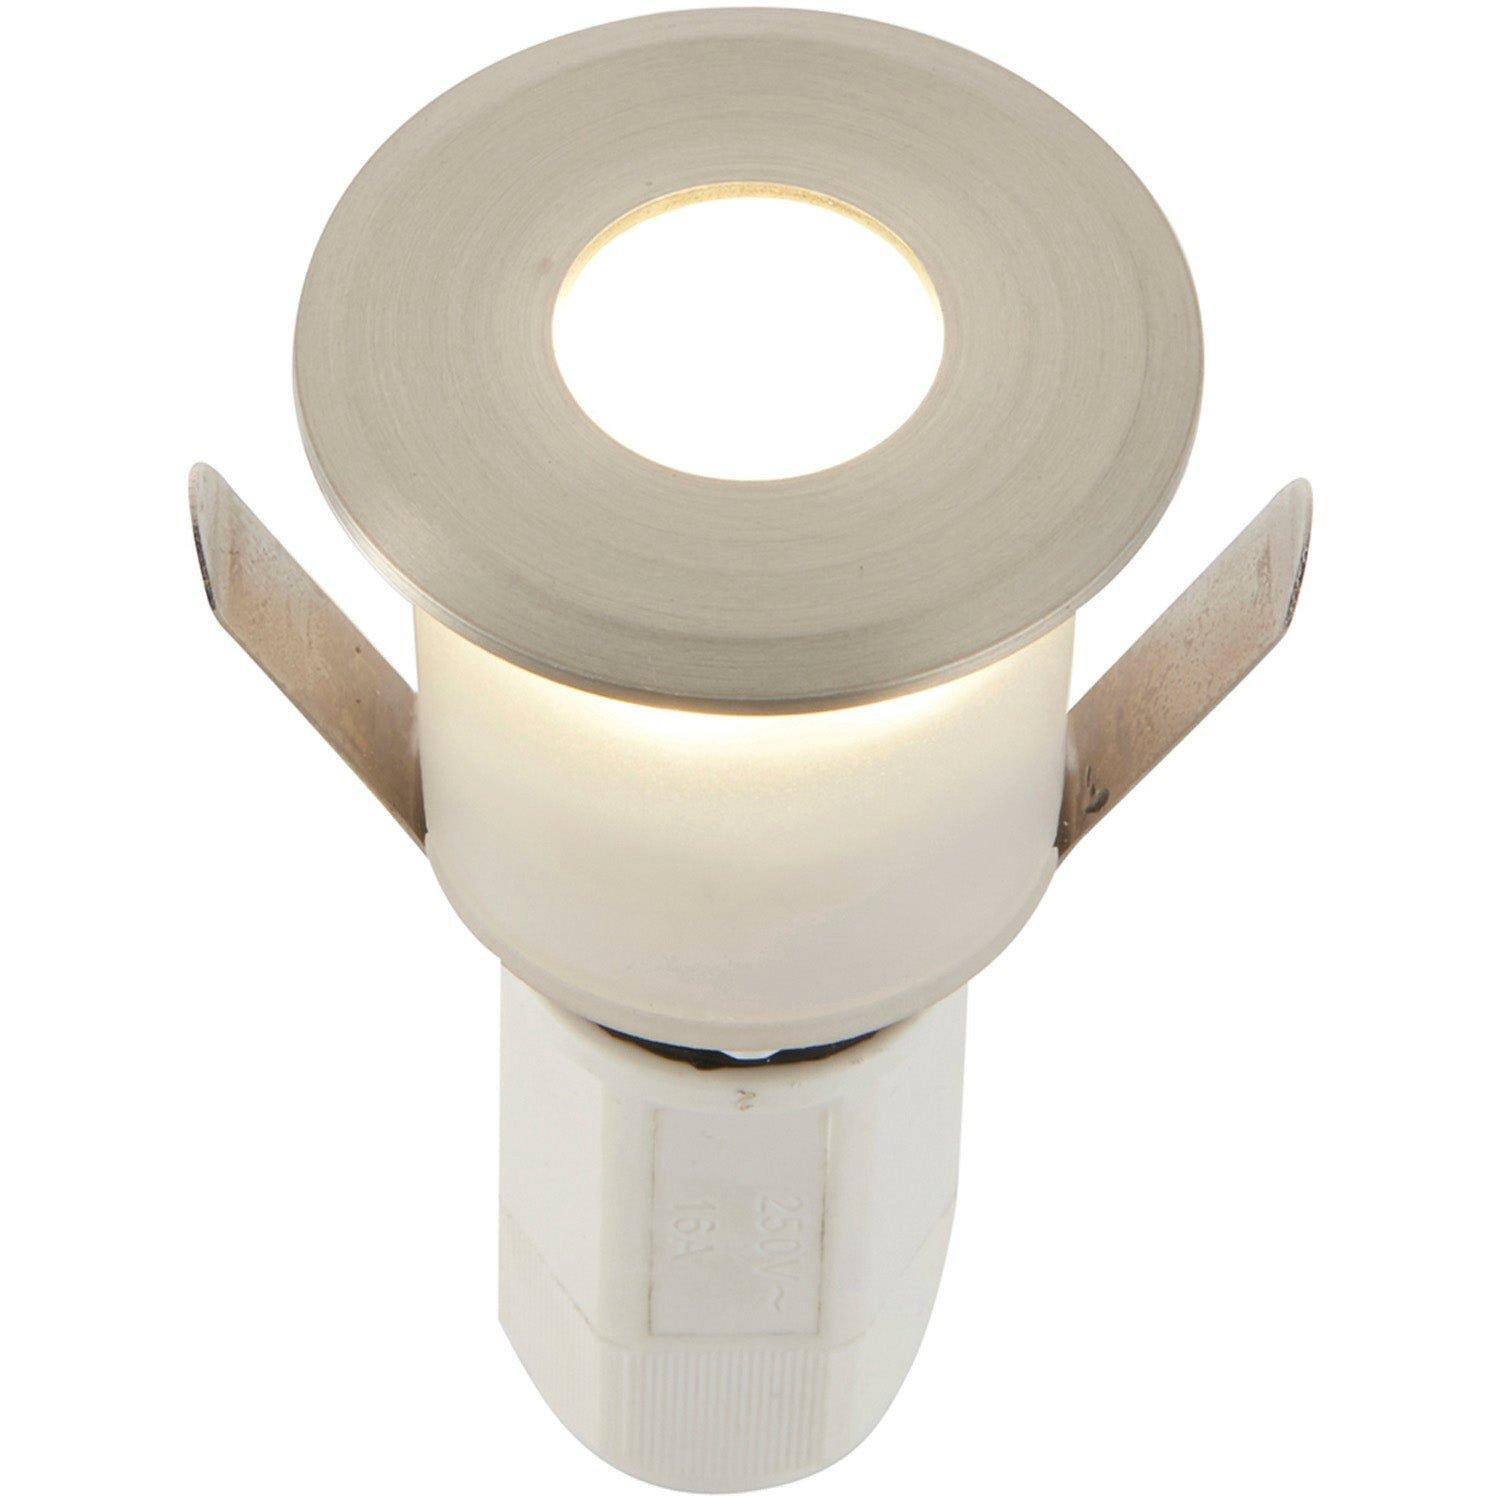 Recessed Decking IP67 Guide Light - 1.2W Cool White LED - Satin Nickel Plate - image 1